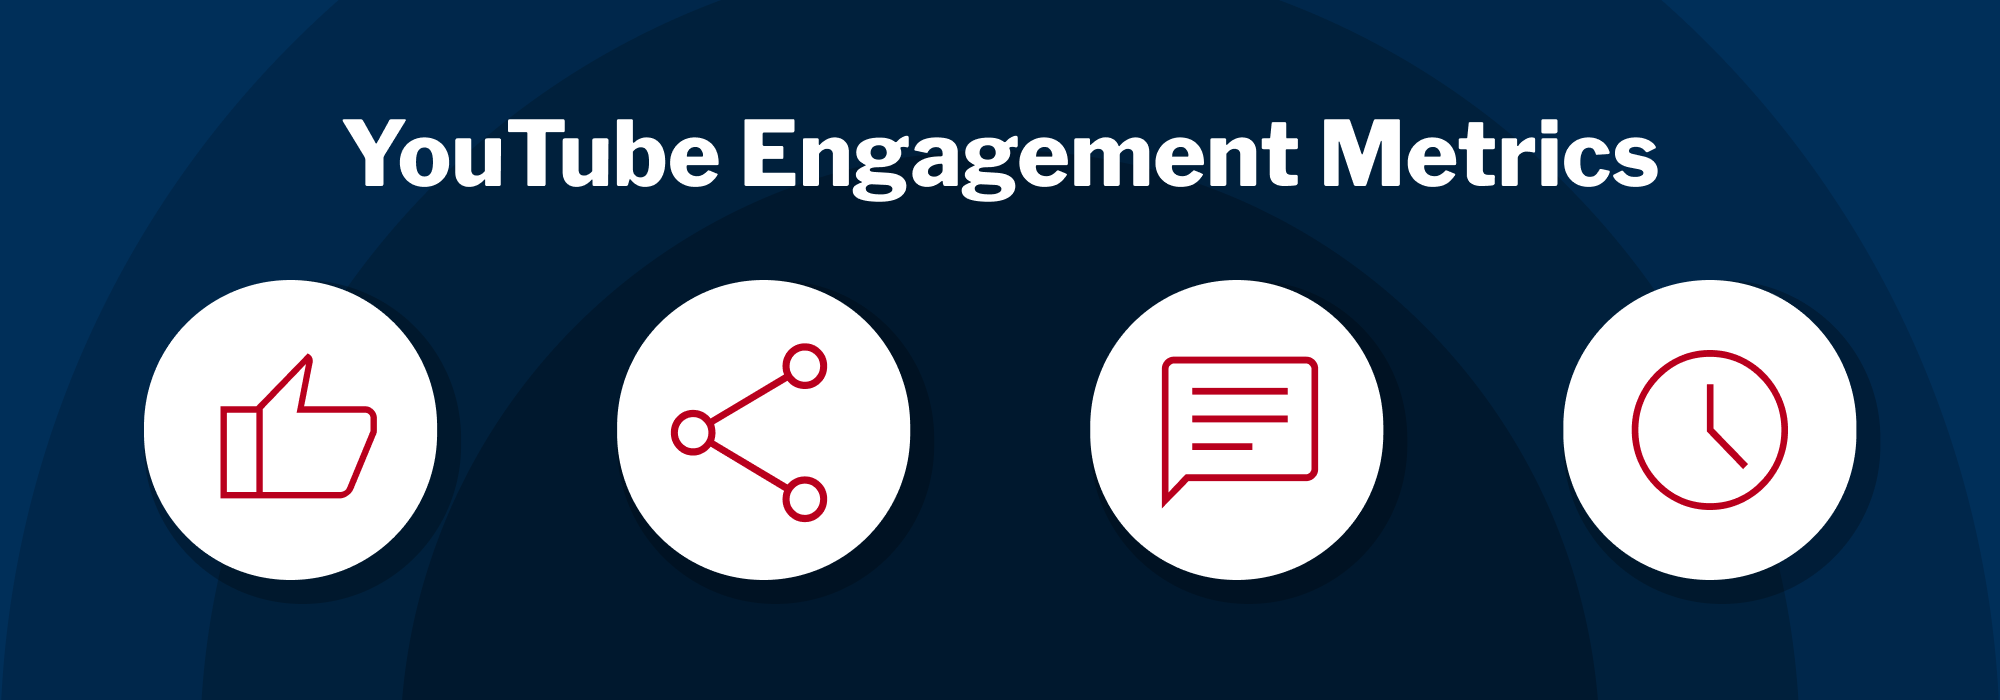  Icons for YouTube Engagement Metrics: like, share, comment, and watch time on a dark blue background.